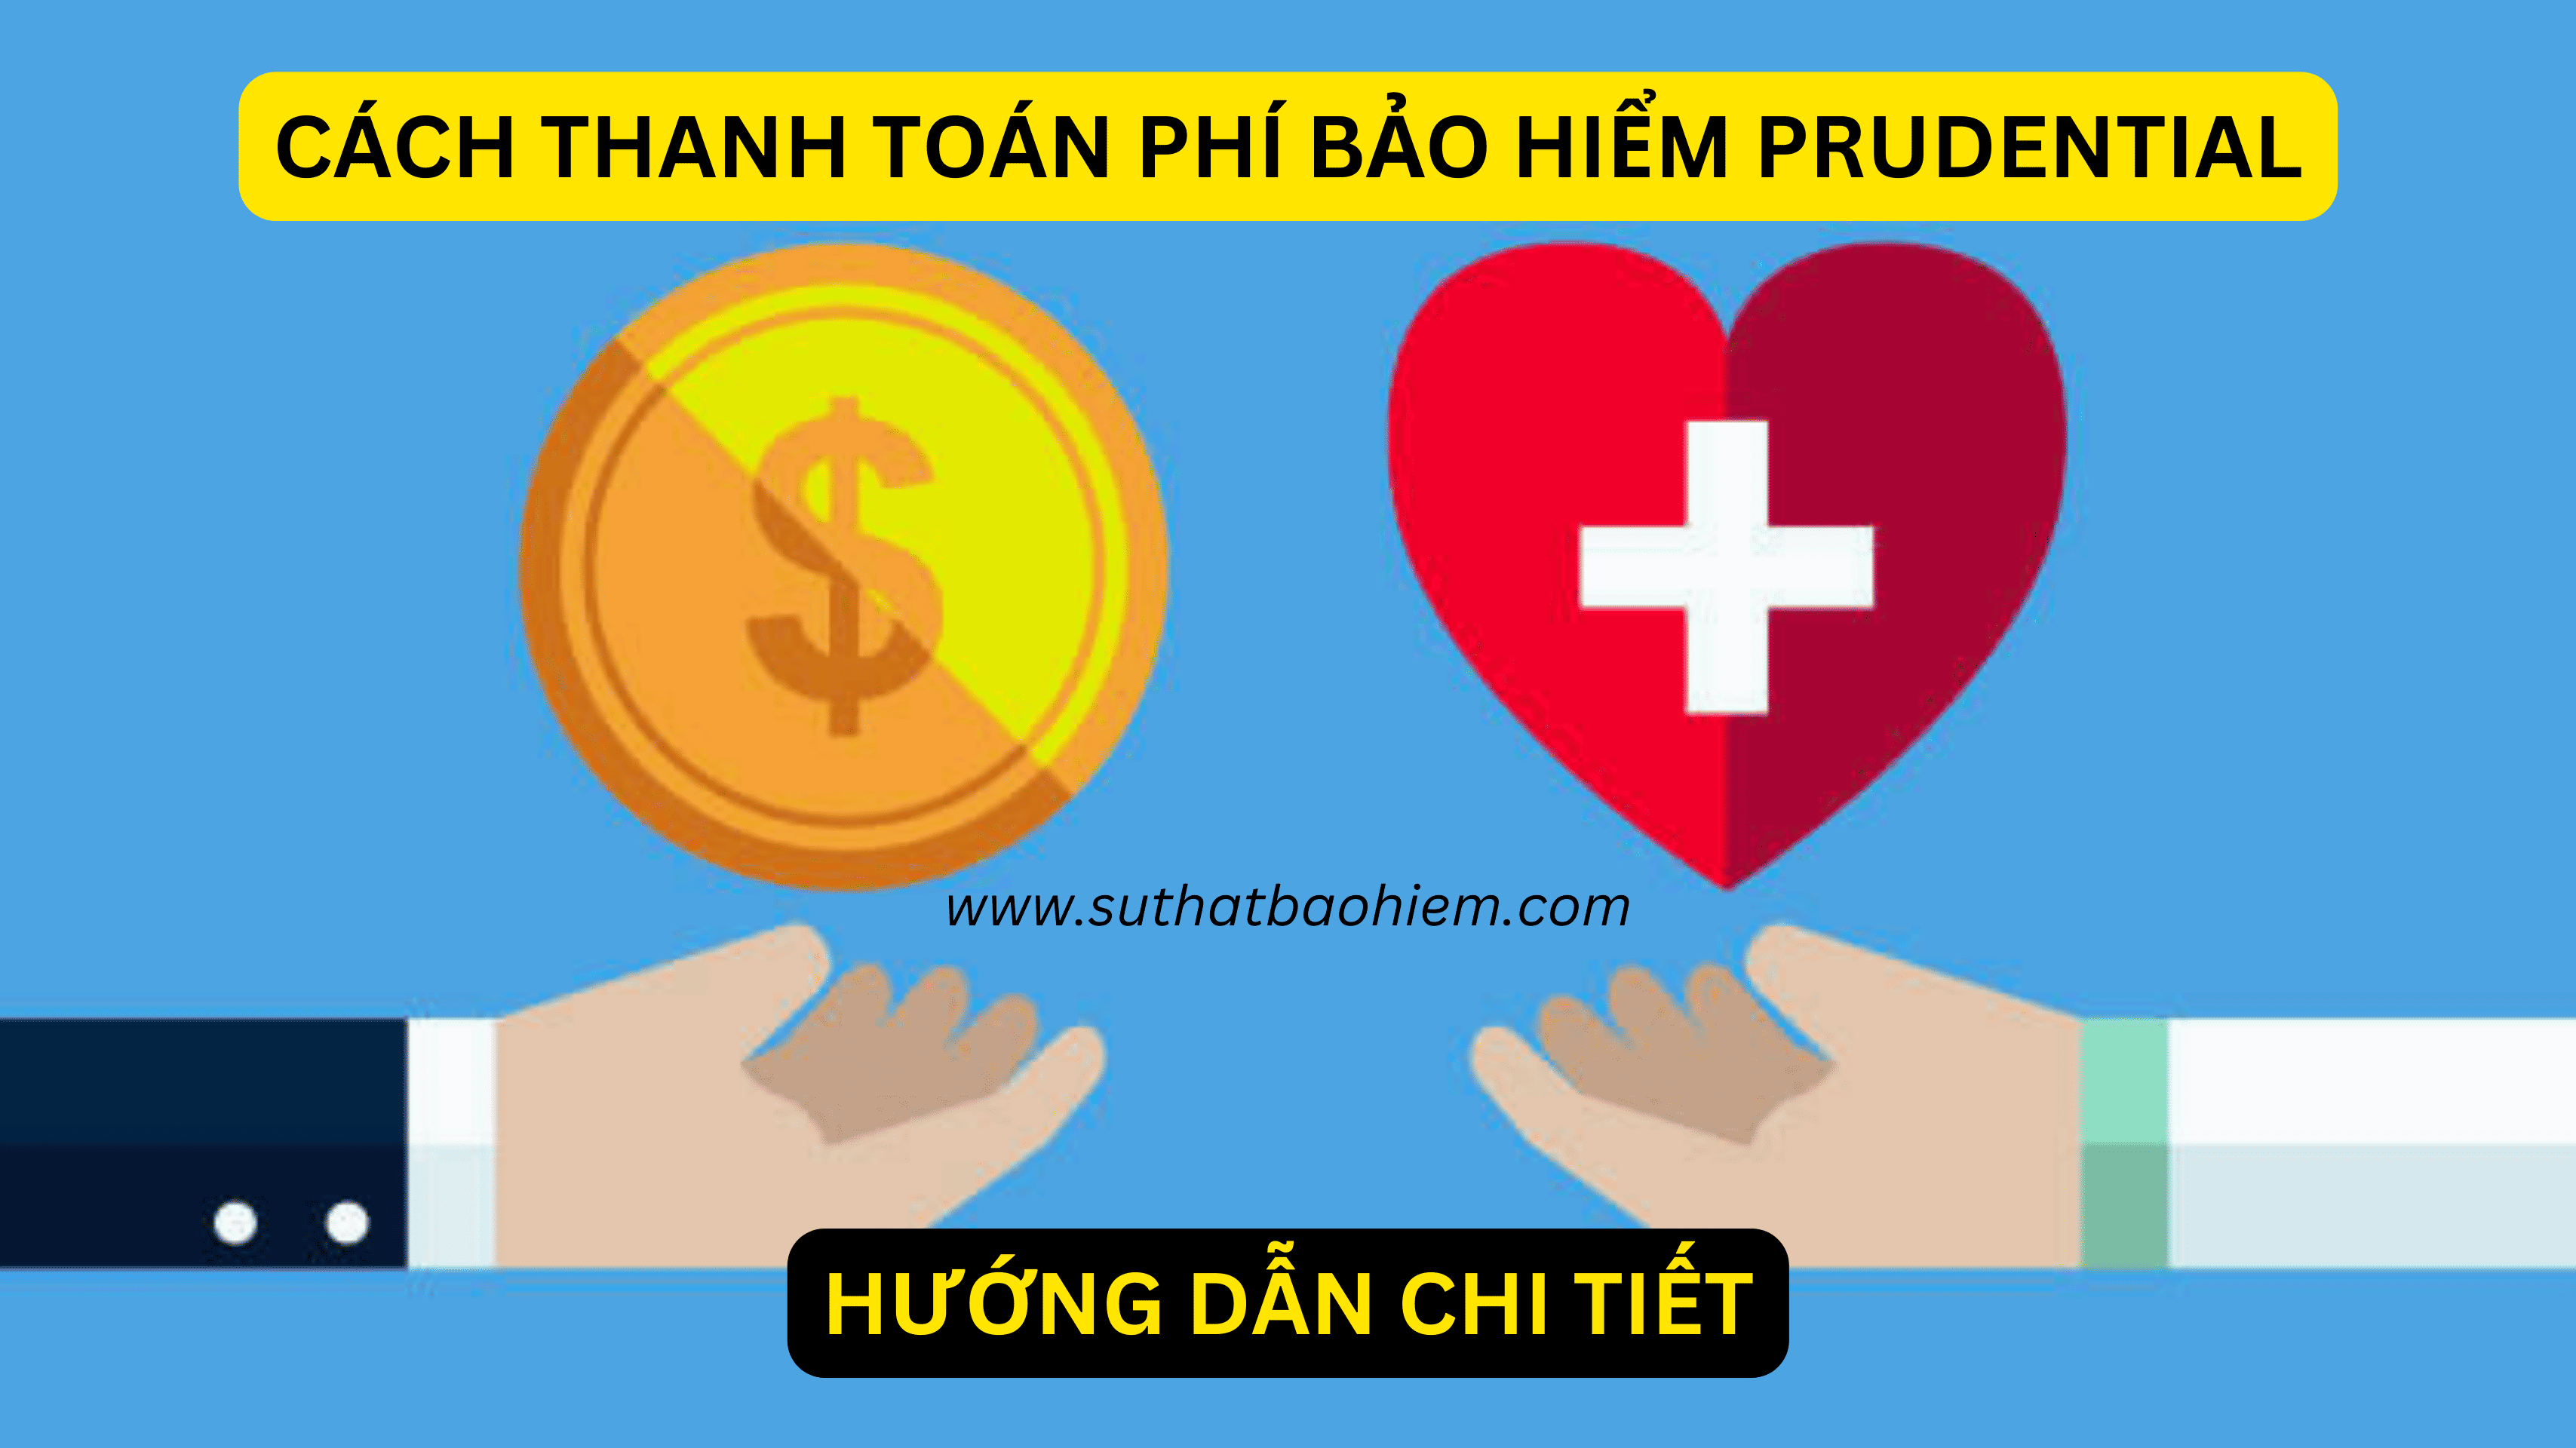 cach thanh toan phi bao hiem prudential